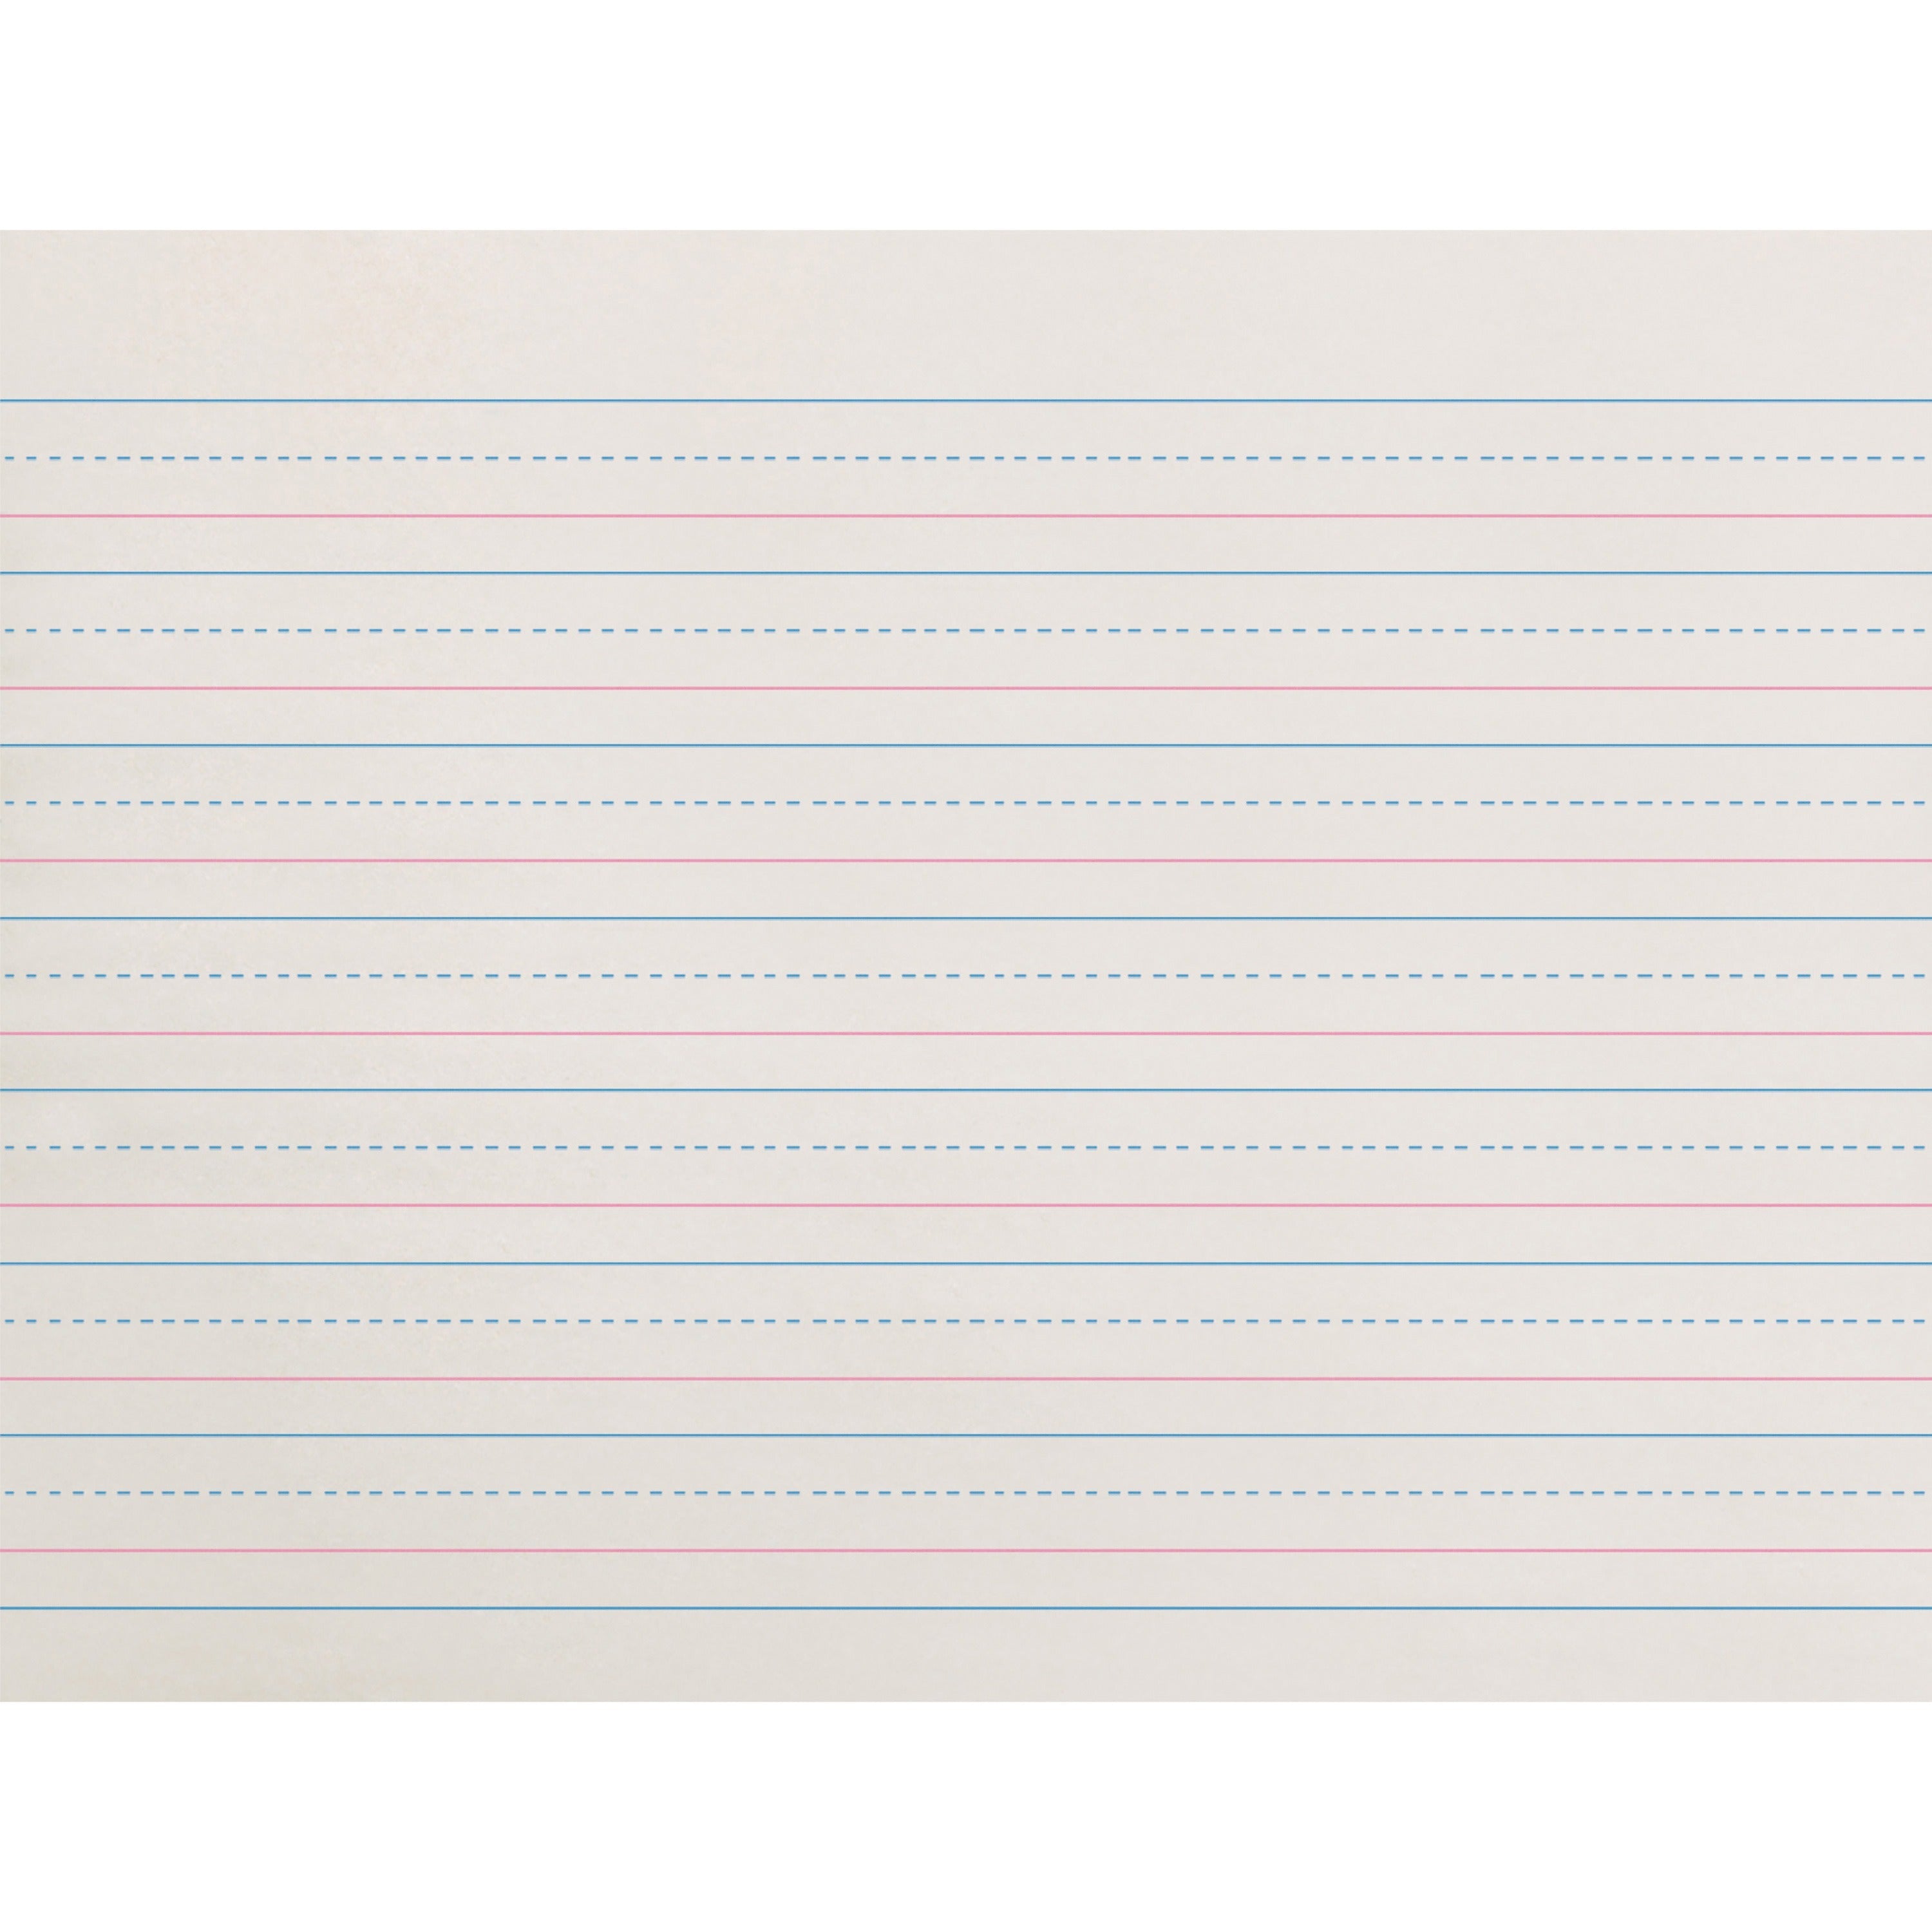 zaner-bloser-dotted-midline-newsprint-paper-500-sheets-063-ruled-unruled-margin-10-1-2-x-8-white-paper-500-pack_paczp2611 - 1